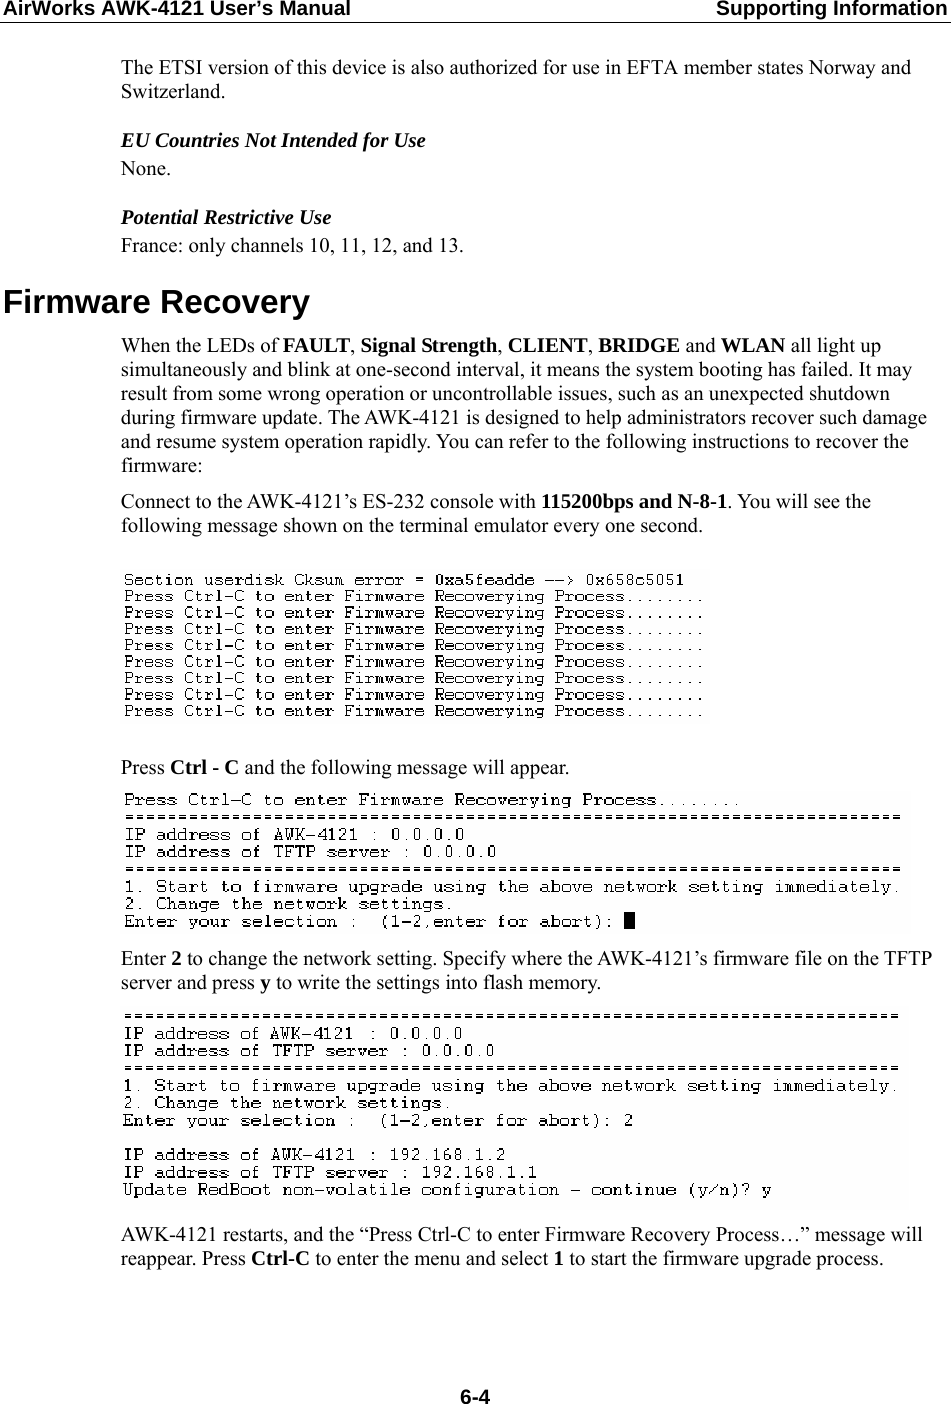 AirWorks AWK-4121 User’s Manual  Supporting Information The ETSI version of this device is also authorized for use in EFTA member states Norway and Switzerland. EU Countries Not Intended for Use None. Potential Restrictive Use France: only channels 10, 11, 12, and 13. Firmware Recovery When the LEDs of FAULT, Signal Strength, CLIENT, BRIDGE and WLAN all light up simultaneously and blink at one-second interval, it means the system booting has failed. It may result from some wrong operation or uncontrollable issues, such as an unexpected shutdown during firmware update. The AWK-4121 is designed to help administrators recover such damage and resume system operation rapidly. You can refer to the following instructions to recover the firmware: Connect to the AWK-4121’s ES-232 console with 115200bps and N-8-1. You will see the following message shown on the terminal emulator every one second.    Press Ctrl - C and the following message will appear.  Enter 2 to change the network setting. Specify where the AWK-4121’s firmware file on the TFTP server and press y to write the settings into flash memory.    AWK-4121 restarts, and the “Press Ctrl-C to enter Firmware Recovery Process…” message will reappear. Press Ctrl-C to enter the menu and select 1 to start the firmware upgrade process.  6-4